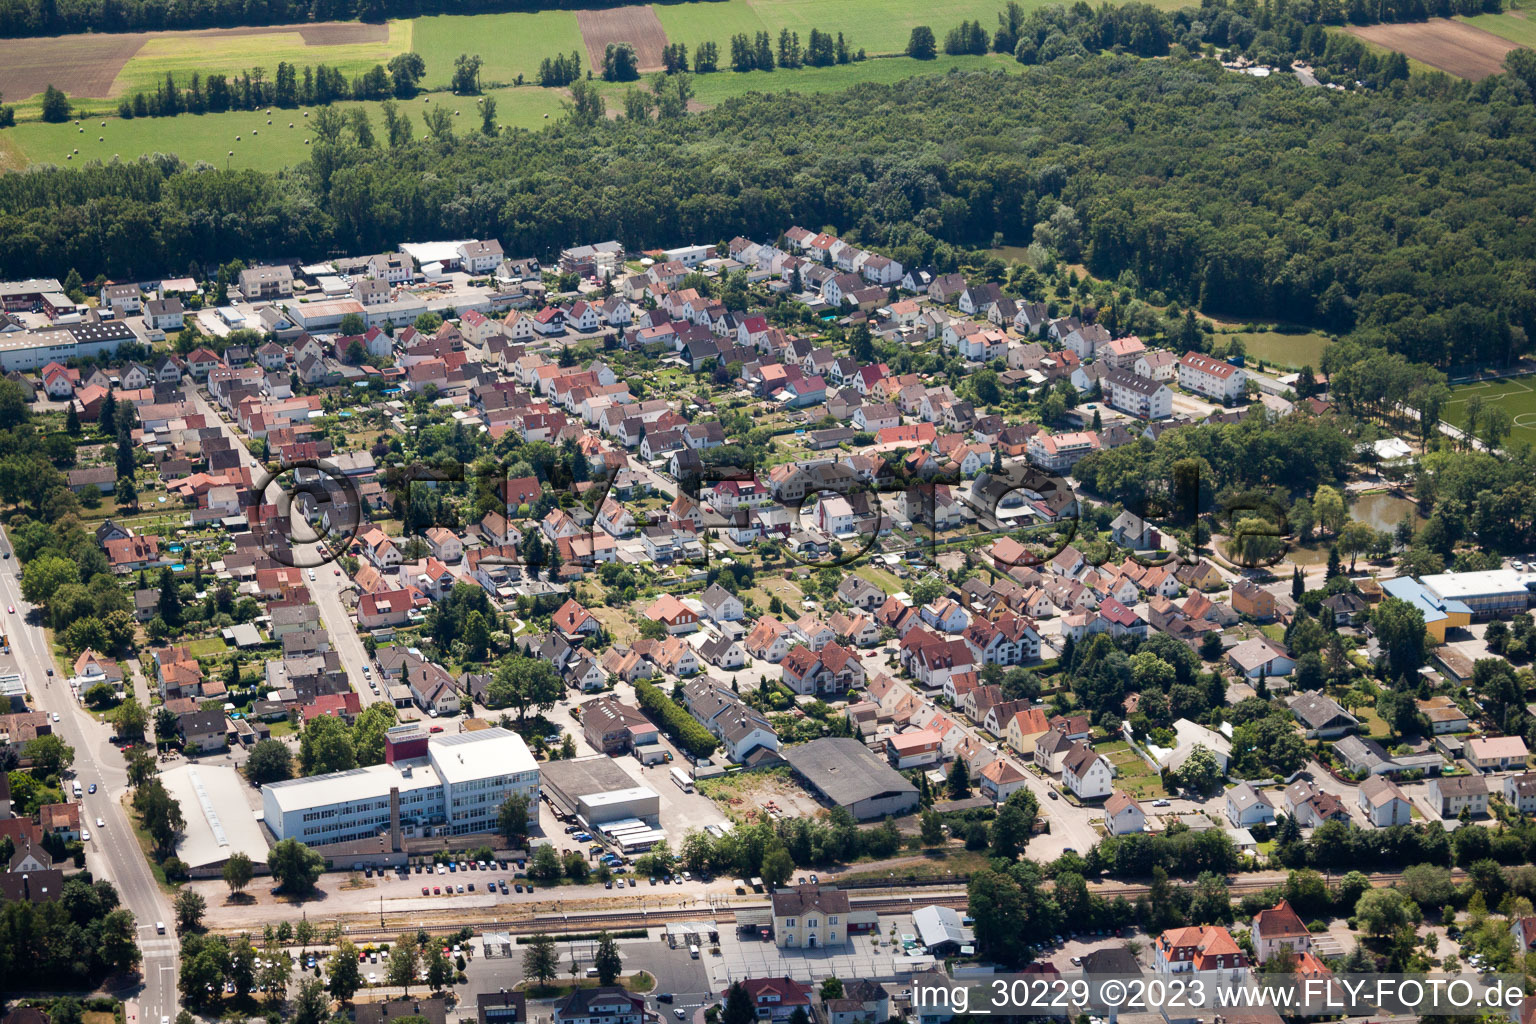 Settlement in Kandel in the state Rhineland-Palatinate, Germany from the drone perspective